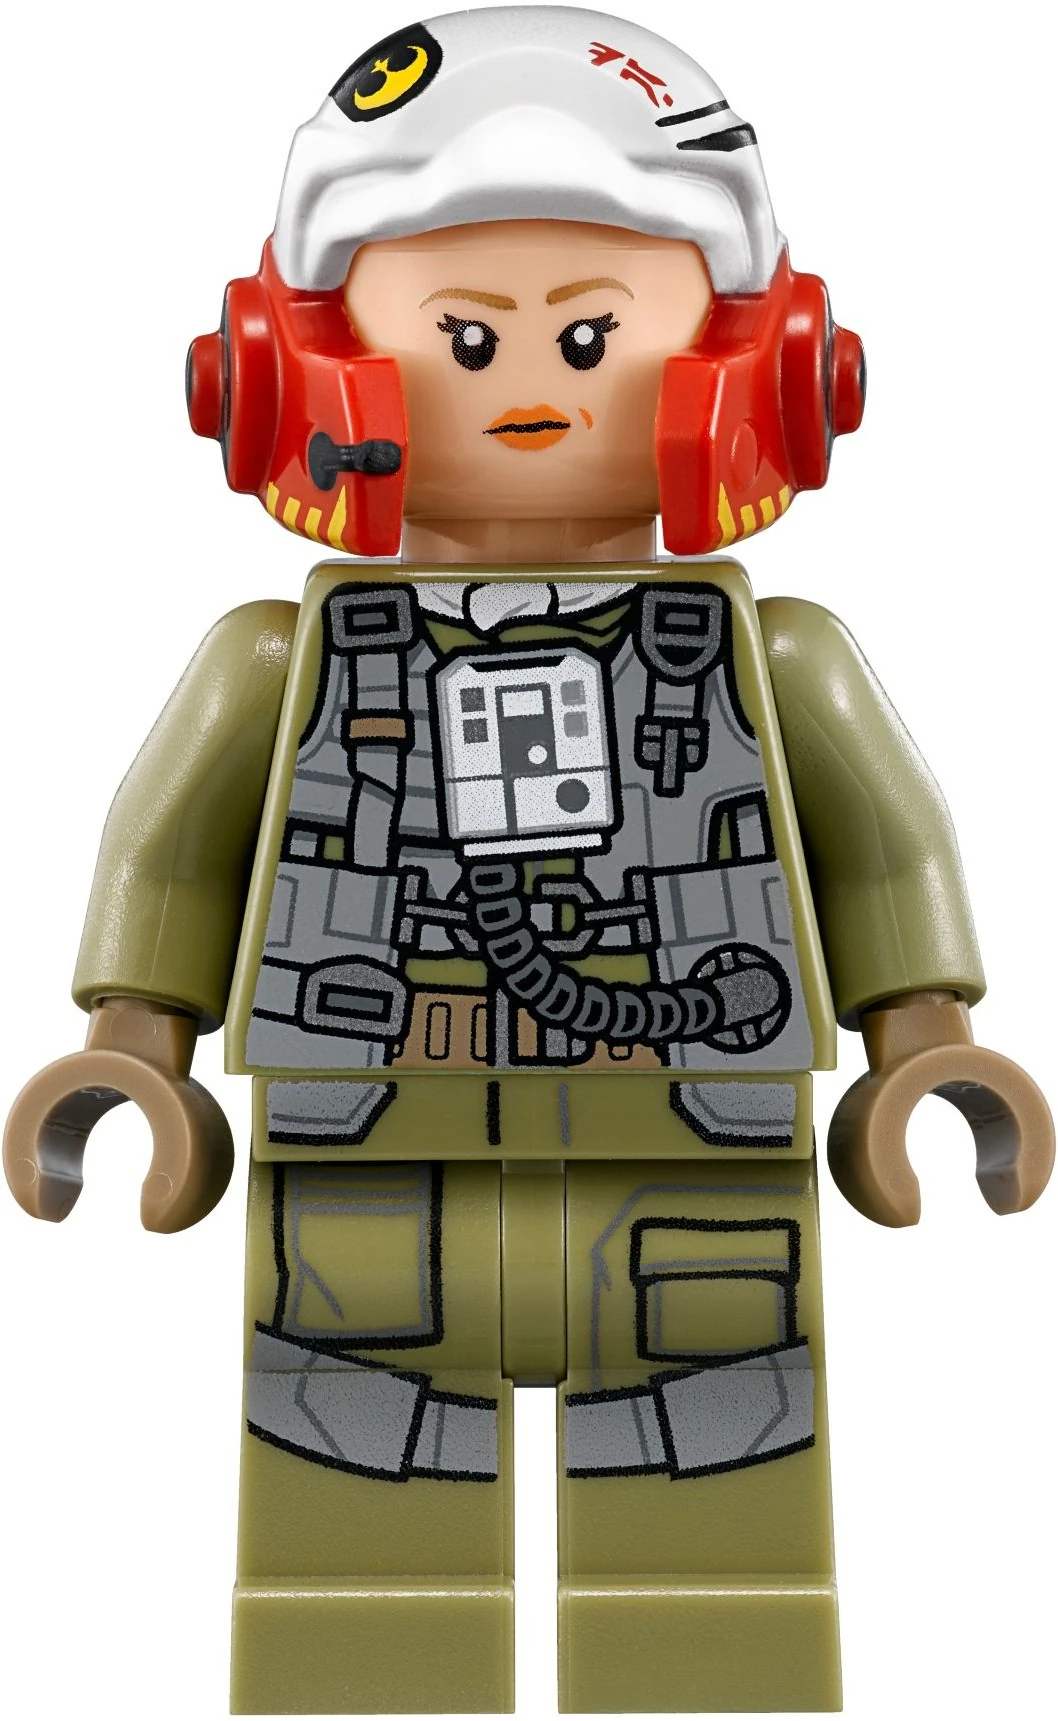 Lego 7754 A-Wing Details about   LEGO® Star Wars™ A Wing Pilot Minifigure Rare HTF 